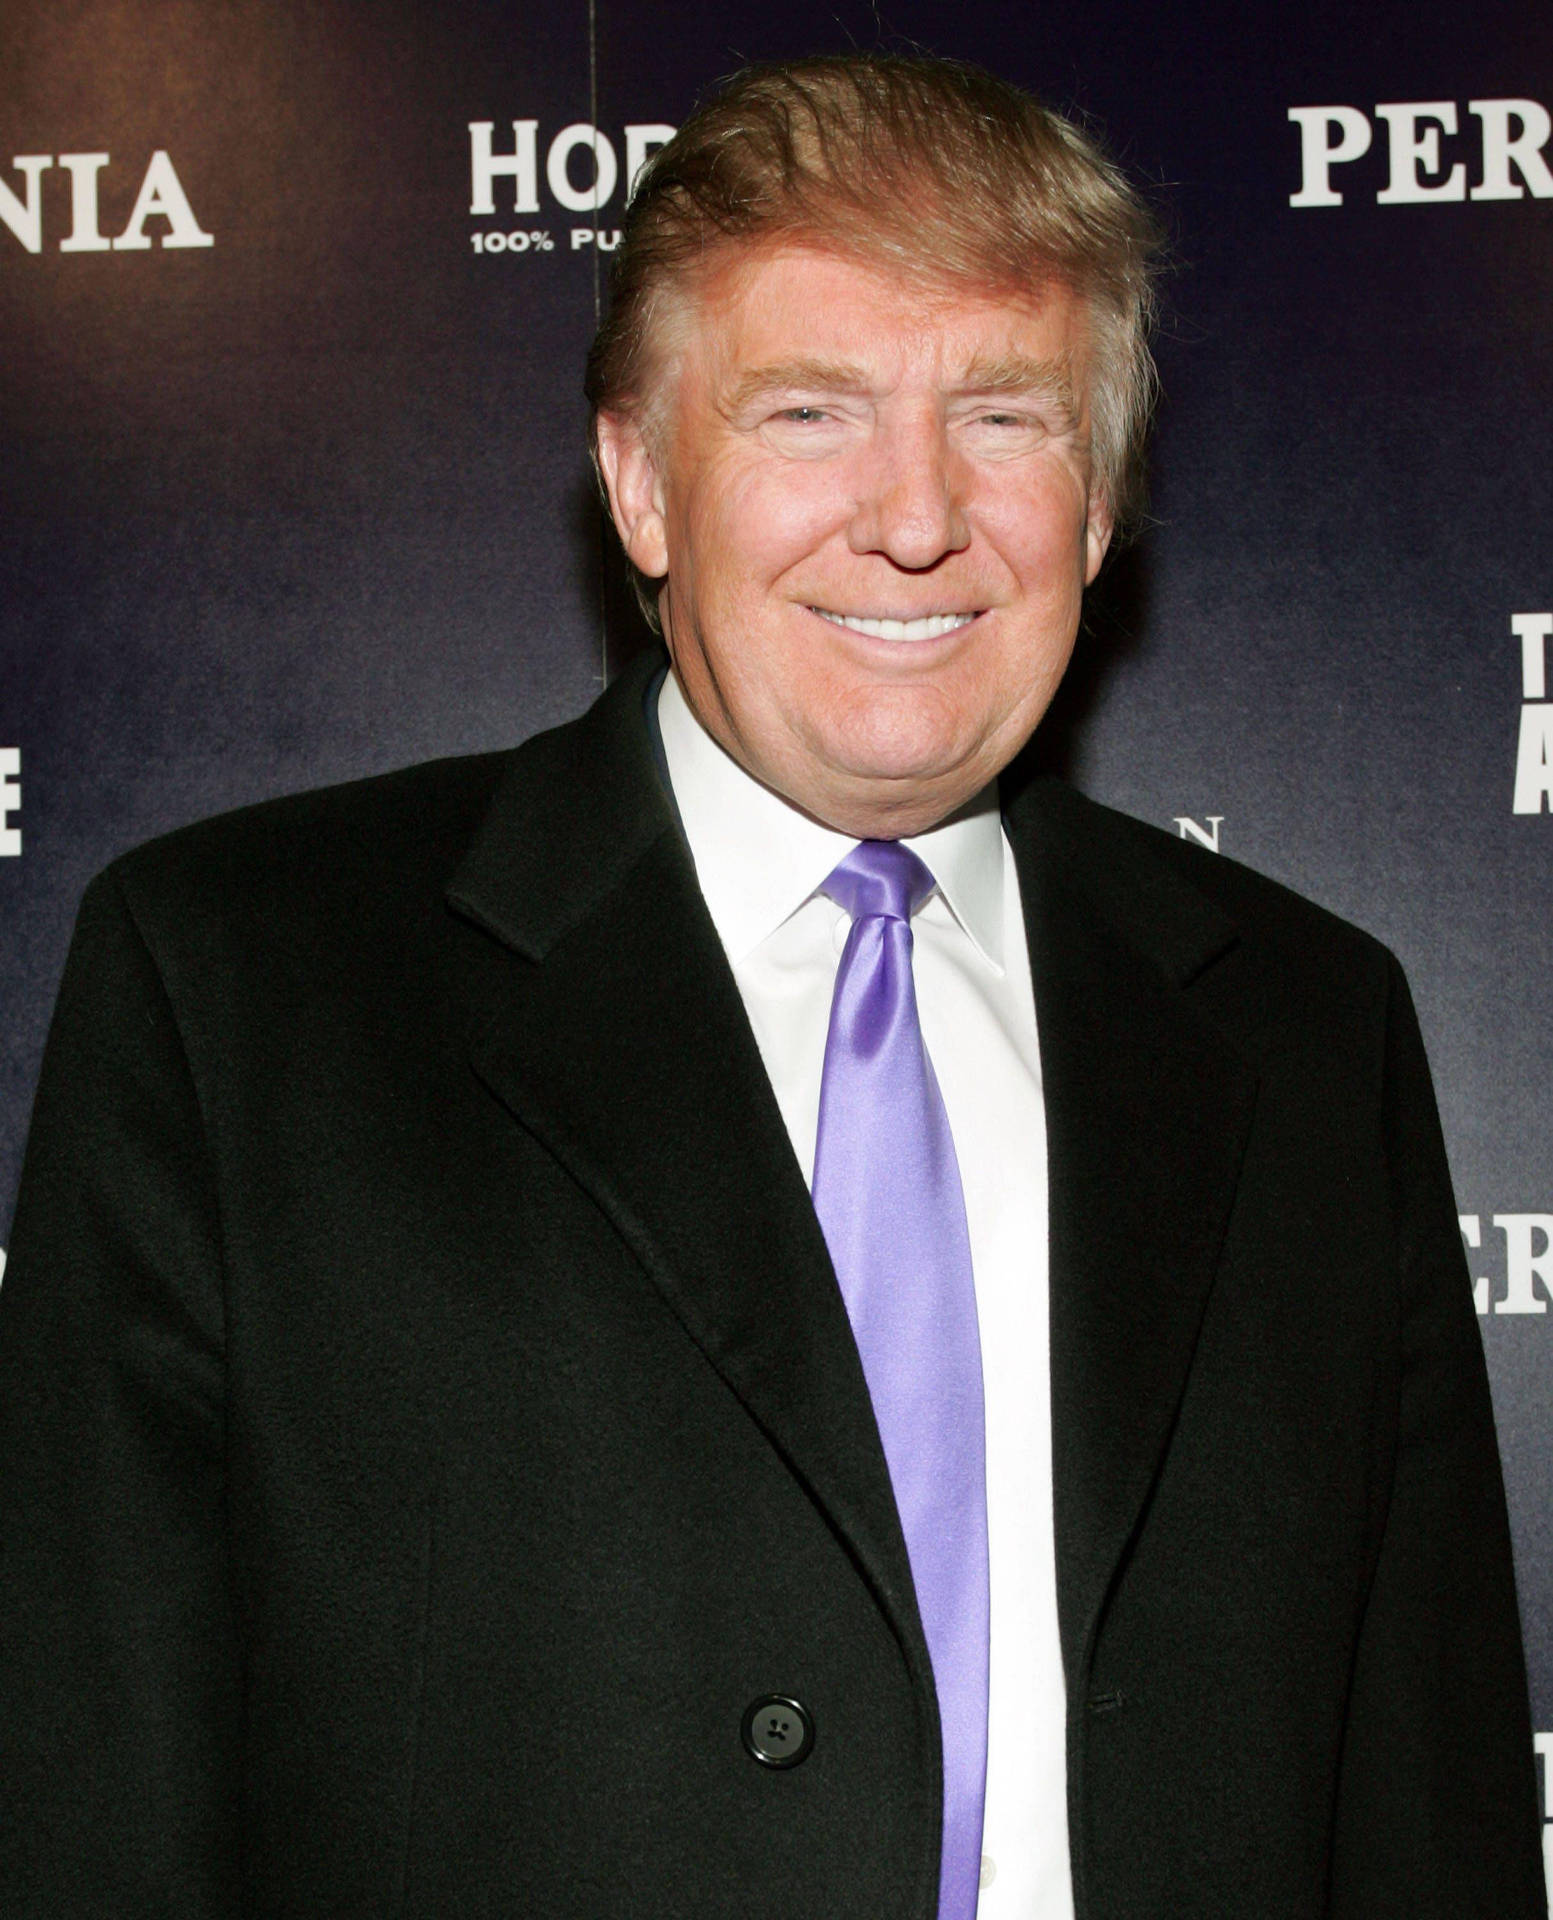 Donald Trump With Periwinkle Tie Wallpaper